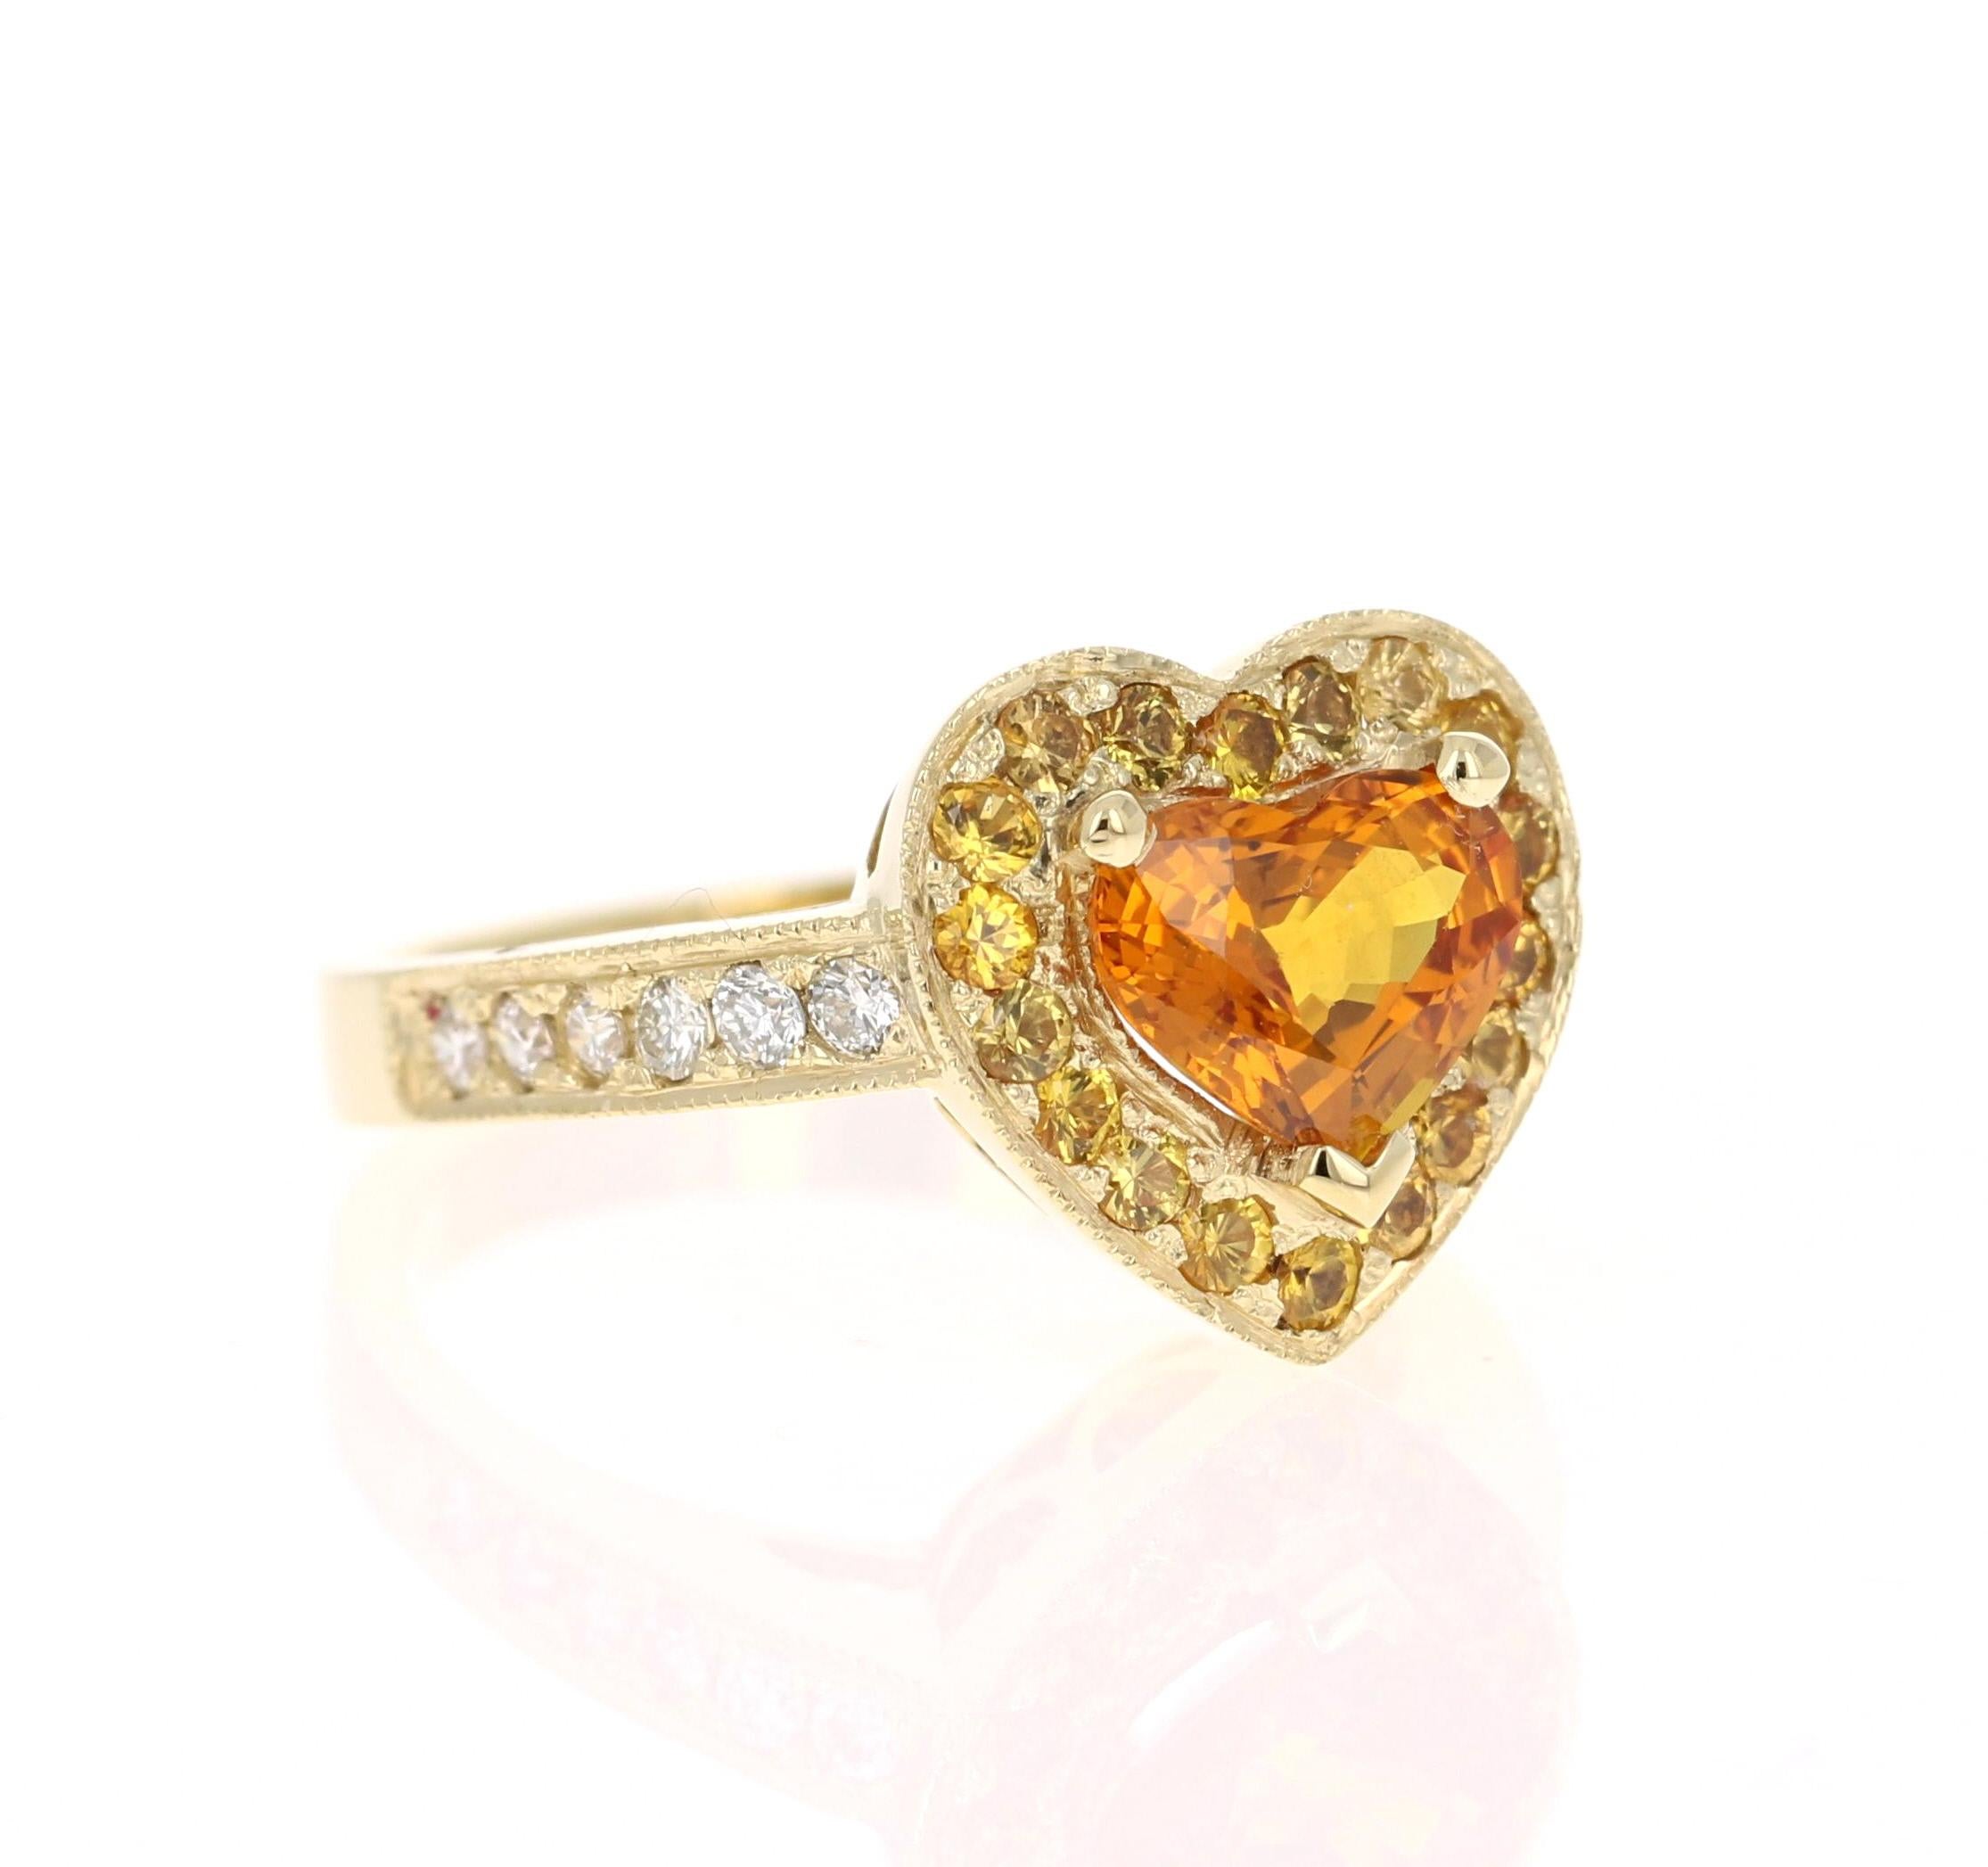 A gorgeous Orange Sapphire and Diamond Ring set in Yellow Gold. It can be the most beautiful and unique Engagement Ring. 

The Heart Cut Orange Sapphire is 1.79 Carats surrounded by a halo of 20 Yellow Sapphires weighing 0.59 Carats. The shank of